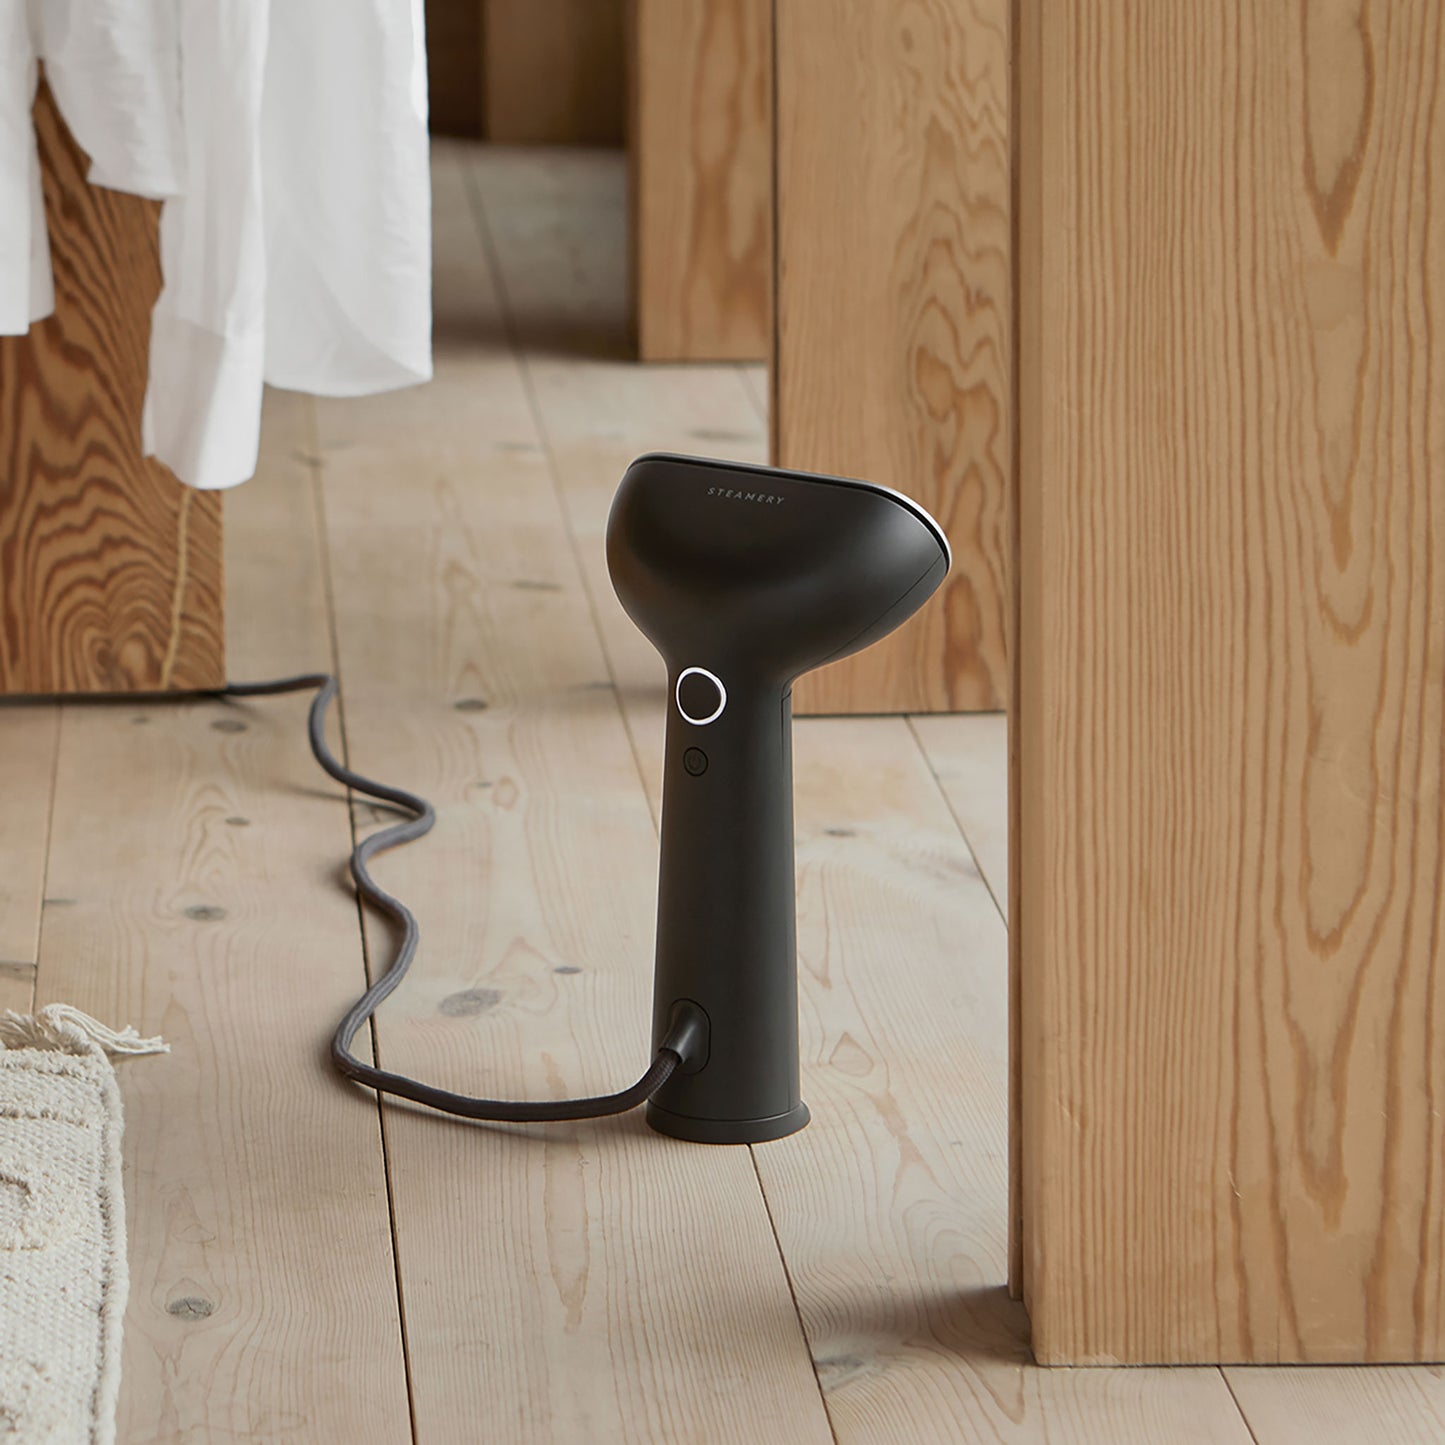 A sleek, black handheld device that functions as both a steamer and an iron, standing in a wooden cottage with the cord trailing behind it. A white linen shirt hangs in the background.